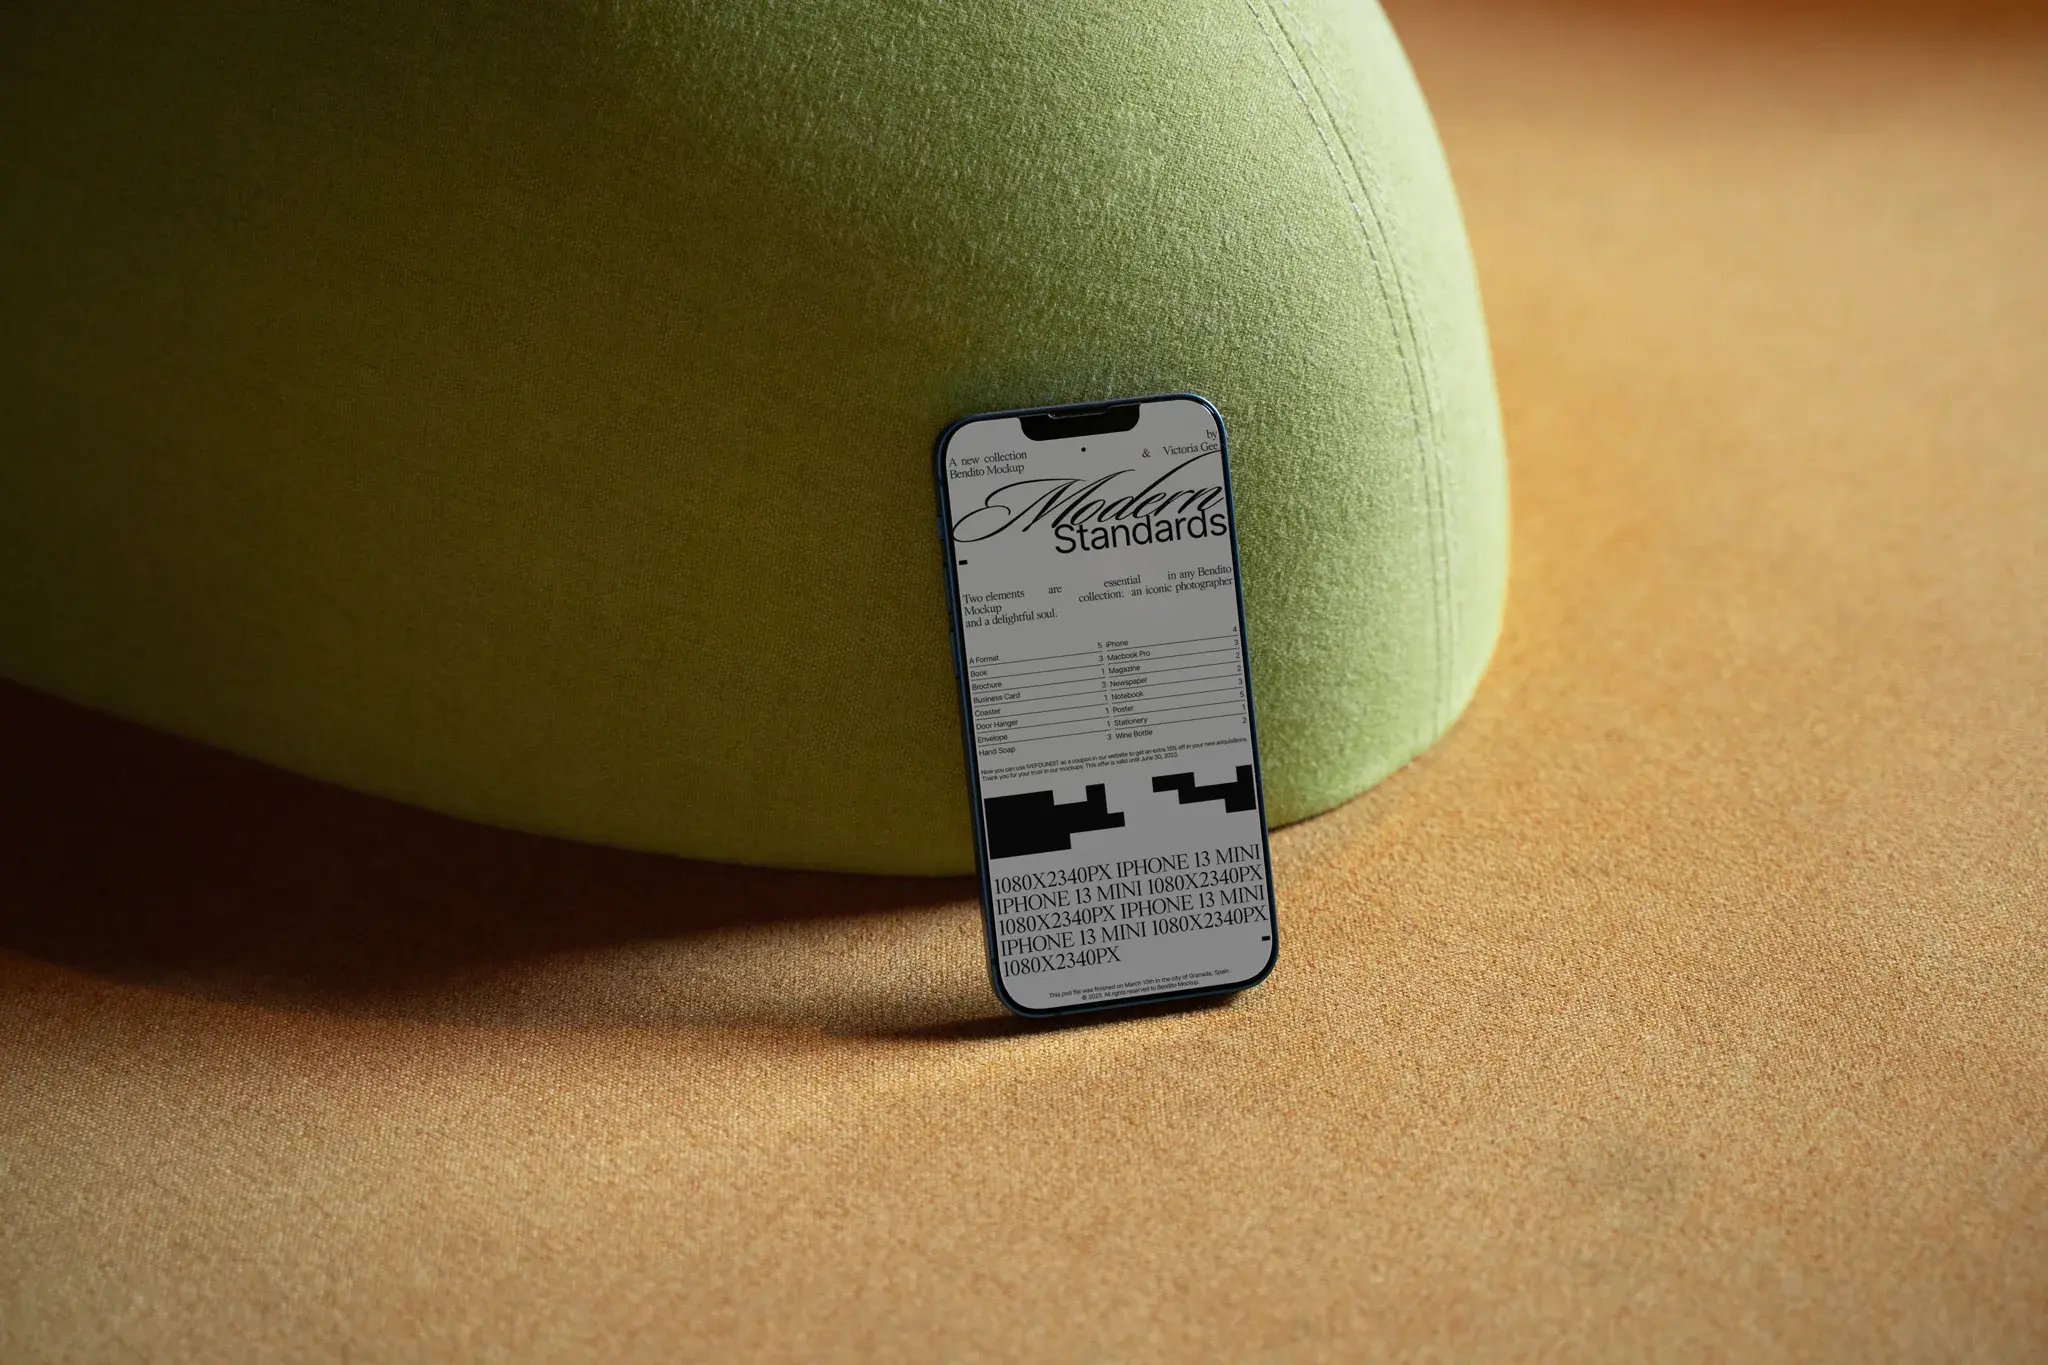 Iphone mockup on top of an orange couch